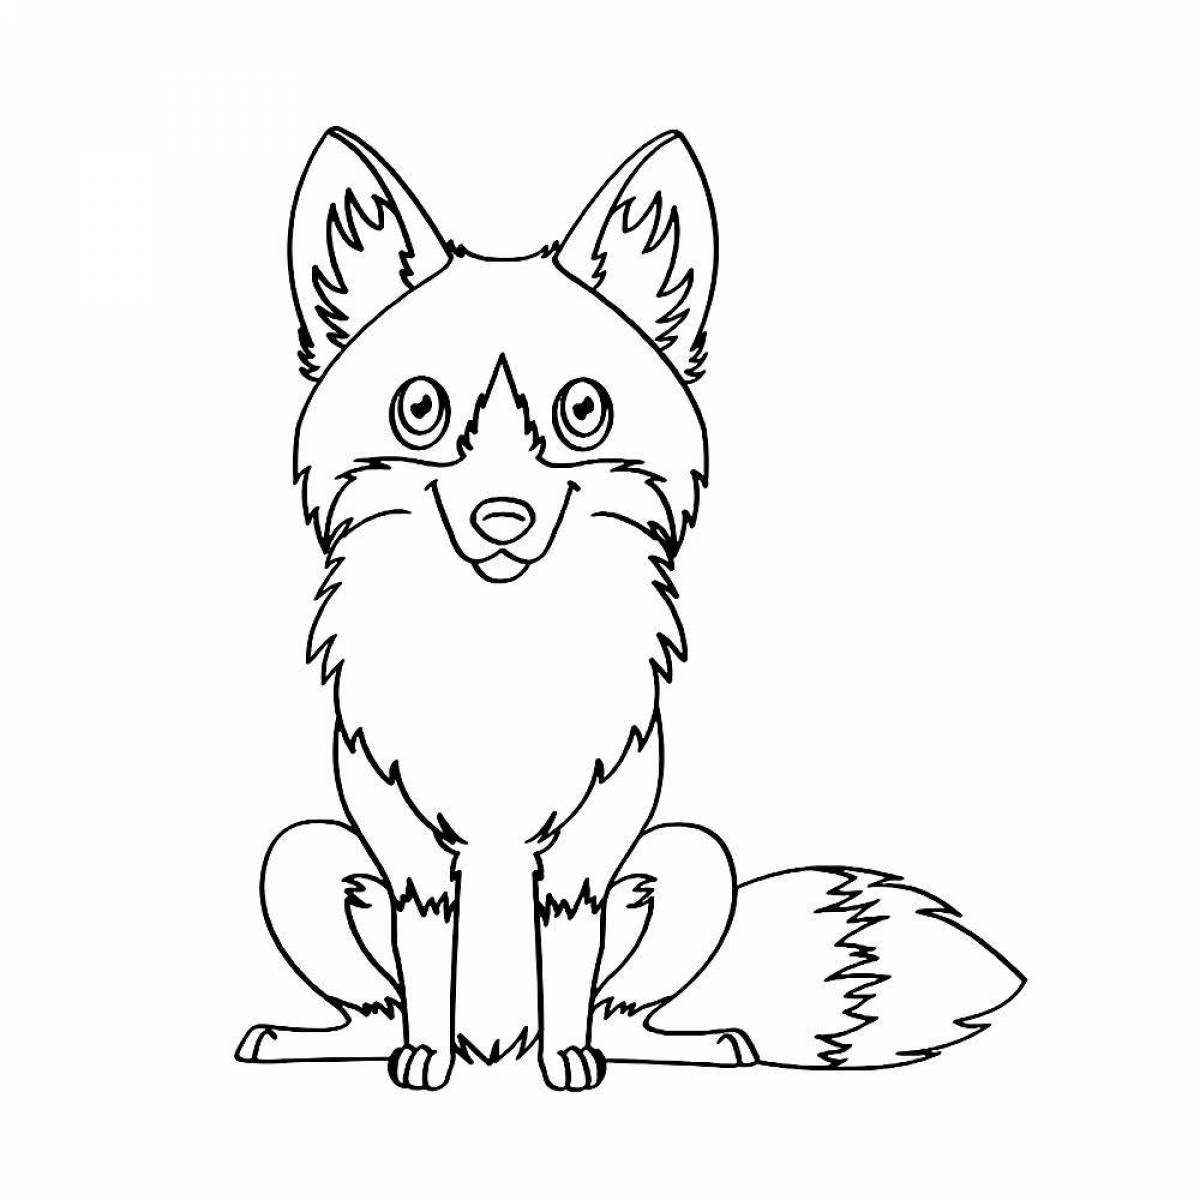 Adorable fox coloring book for children 3-4 years old